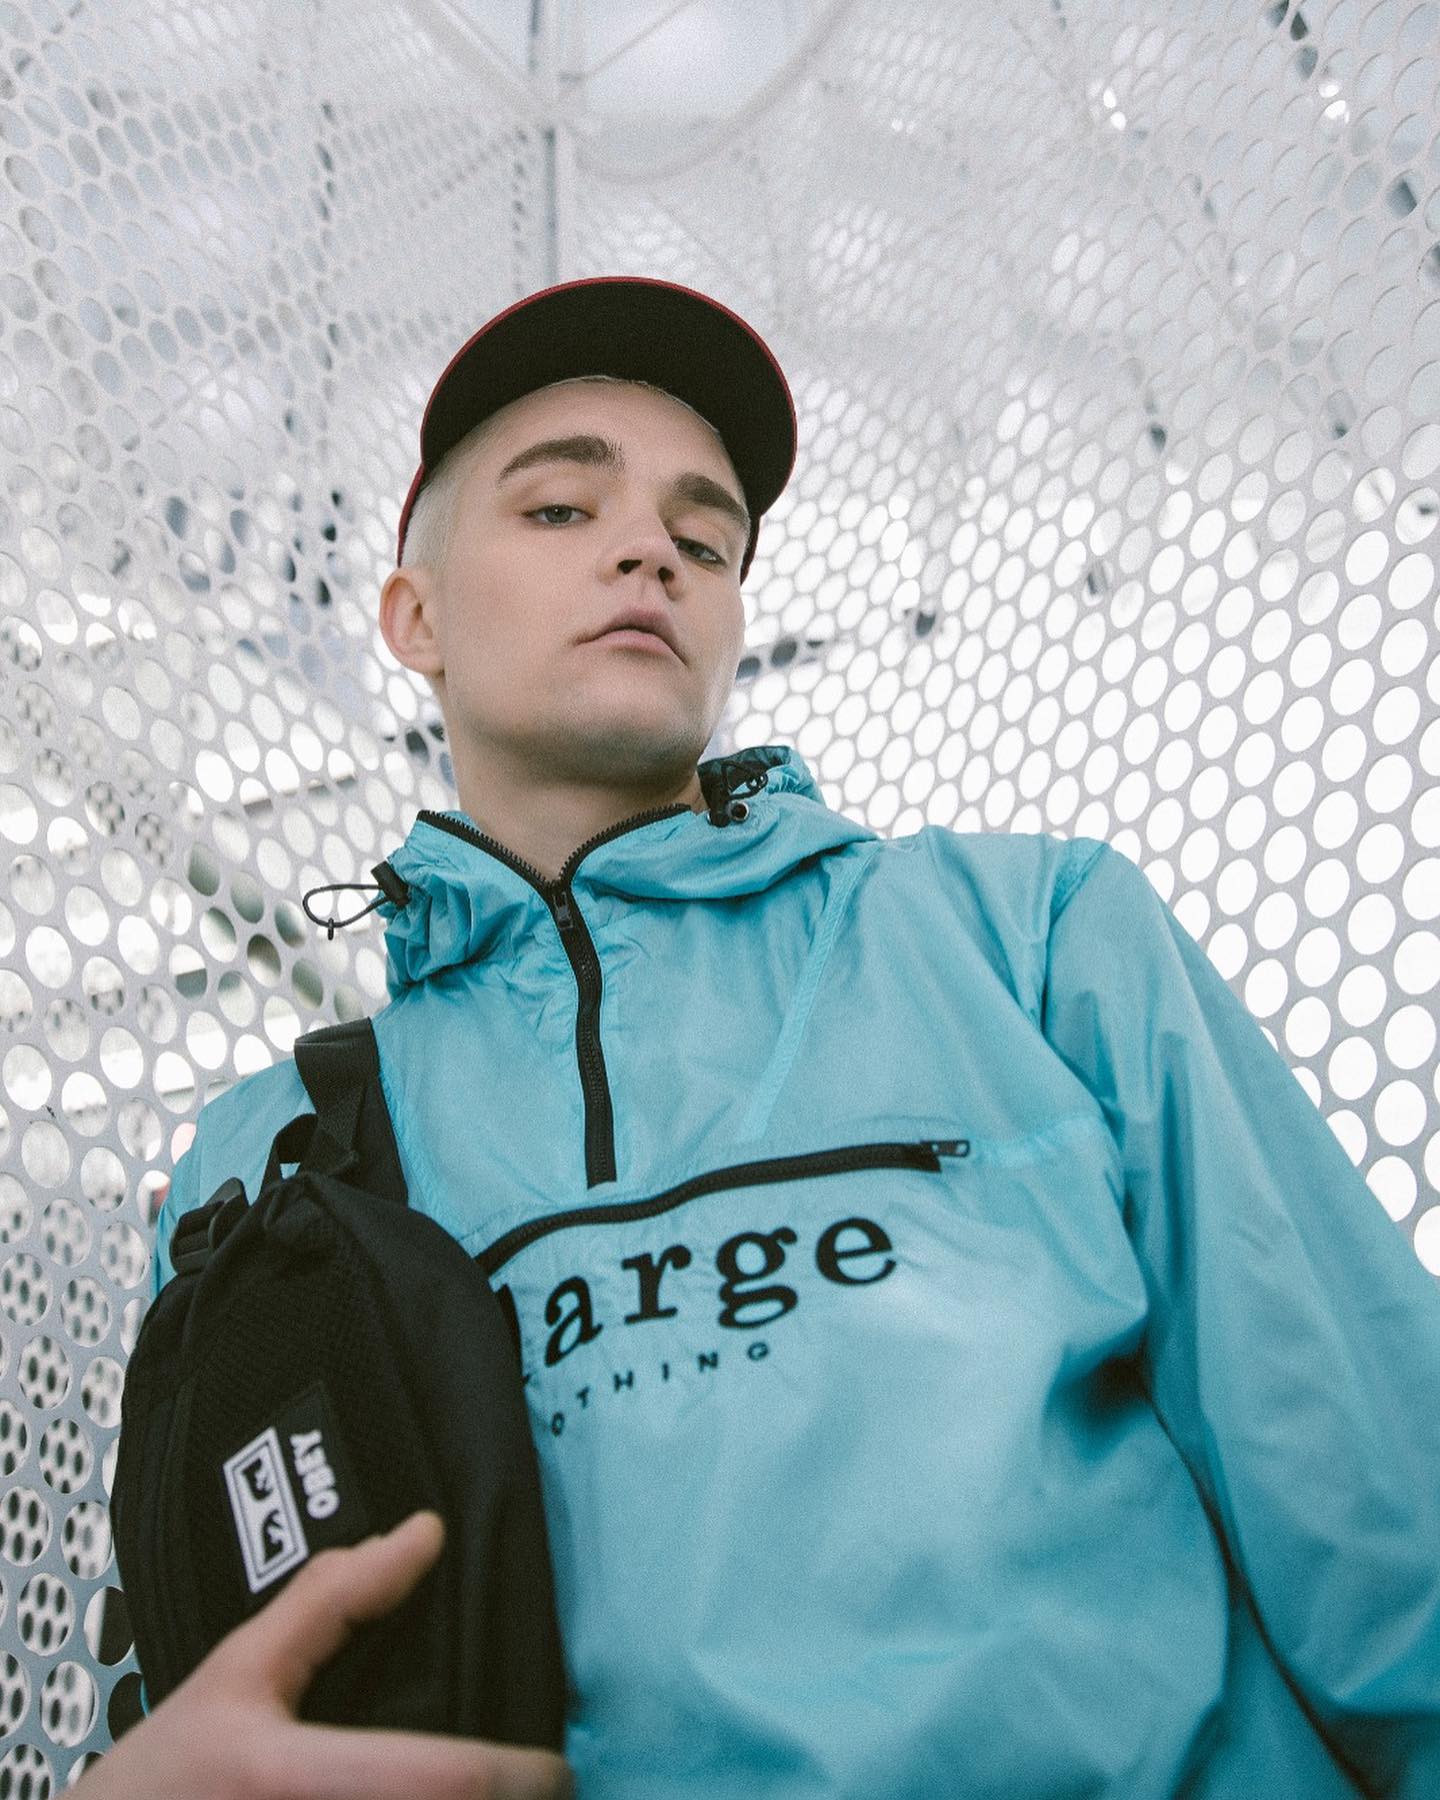 Our 2019 summer editorial features half-zip, sweatpants and daily essential fanny pack from brands including @xlargejp , @rebel8 and @obeyclothing . Head to double-park stores for more items. @doubleparkstore #doubleparkstore 